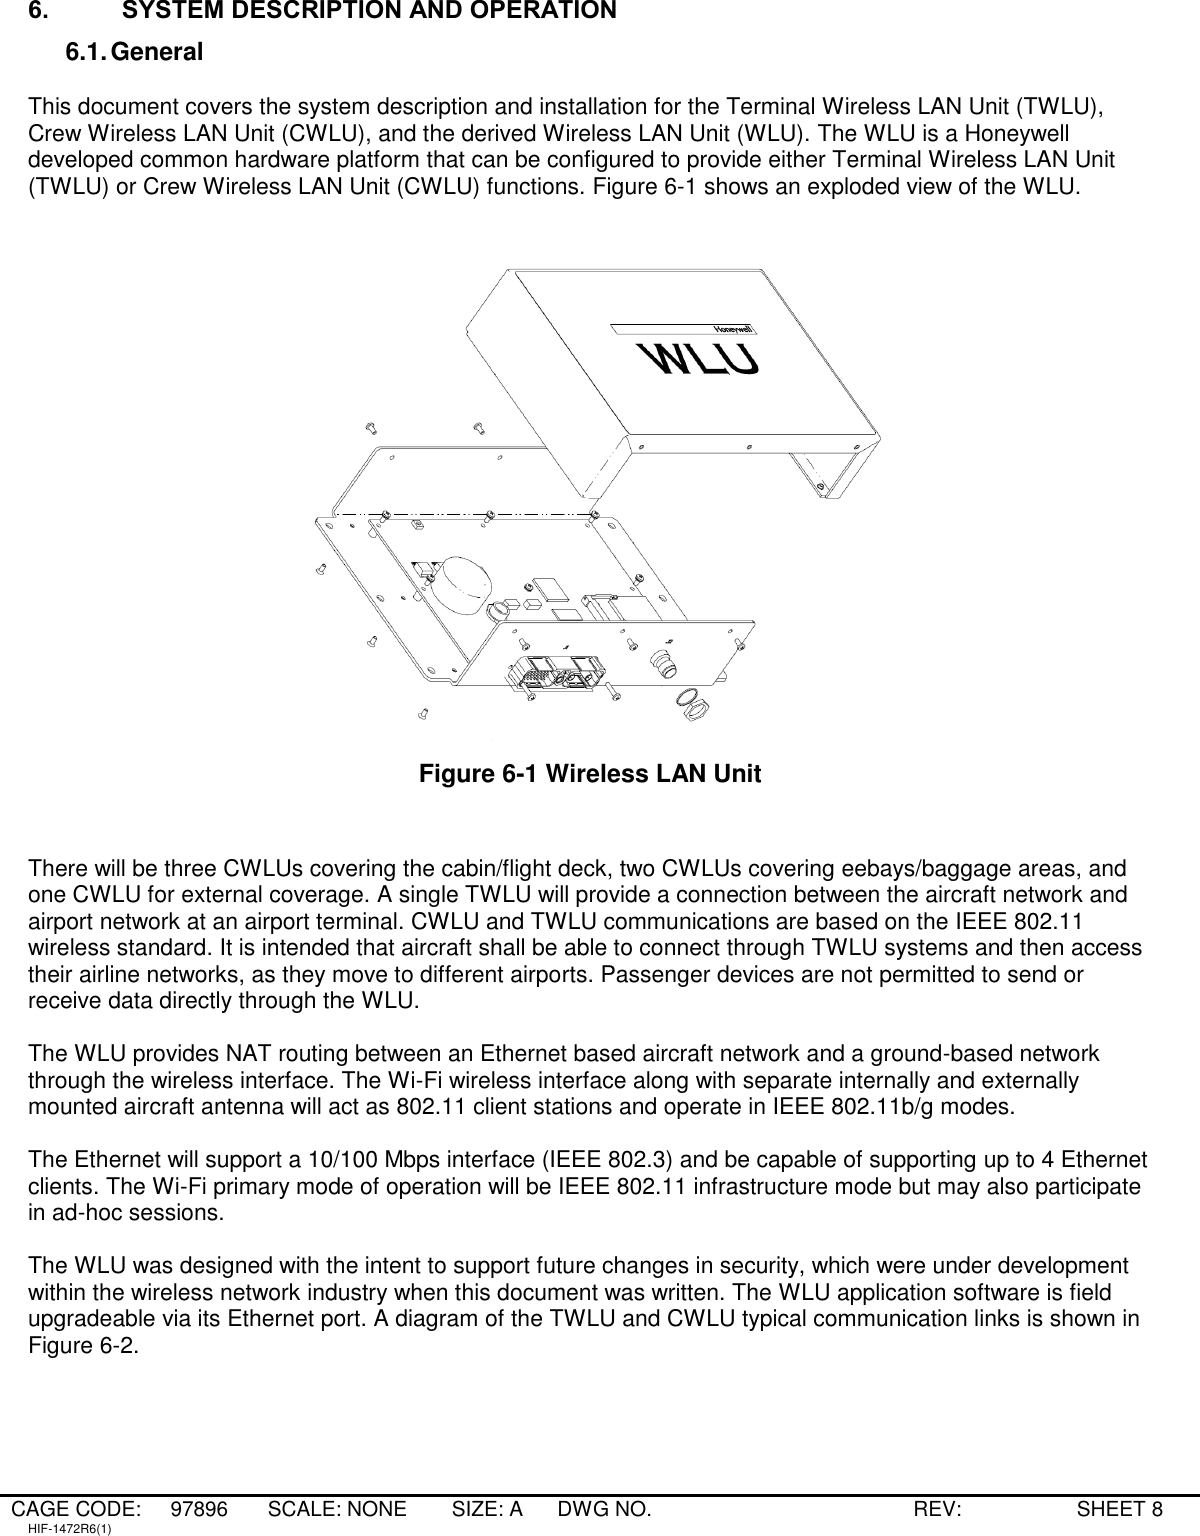 CAGE CODE: 97896 SCALE: NONE   SIZE: A DWG NO.   REV:   SHEET 8 HIF-1472R6(1) 6. SYSTEM DESCRIPTION AND OPERATION 6.1. General  This document covers the system description and installation for the Terminal Wireless LAN Unit (TWLU), Crew Wireless LAN Unit (CWLU), and the derived Wireless LAN Unit (WLU). The WLU is a Honeywell developed common hardware platform that can be configured to provide either Terminal Wireless LAN Unit (TWLU) or Crew Wireless LAN Unit (CWLU) functions. Figure 6-1 shows an exploded view of the WLU.   Figure 6-1 Wireless LAN Unit   There will be three CWLUs covering the cabin/flight deck, two CWLUs covering eebays/baggage areas, and one CWLU for external coverage. A single TWLU will provide a connection between the aircraft network and airport network at an airport terminal. CWLU and TWLU communications are based on the IEEE 802.11 wireless standard. It is intended that aircraft shall be able to connect through TWLU systems and then access their airline networks, as they move to different airports. Passenger devices are not permitted to send or receive data directly through the WLU.  The WLU provides NAT routing between an Ethernet based aircraft network and a ground-based network through the wireless interface. The Wi-Fi wireless interface along with separate internally and externally mounted aircraft antenna will act as 802.11 client stations and operate in IEEE 802.11b/g modes.  The Ethernet will support a 10/100 Mbps interface (IEEE 802.3) and be capable of supporting up to 4 Ethernet clients. The Wi-Fi primary mode of operation will be IEEE 802.11 infrastructure mode but may also participate in ad-hoc sessions.  The WLU was designed with the intent to support future changes in security, which were under development within the wireless network industry when this document was written. The WLU application software is field upgradeable via its Ethernet port. A diagram of the TWLU and CWLU typical communication links is shown in Figure 6-2.  